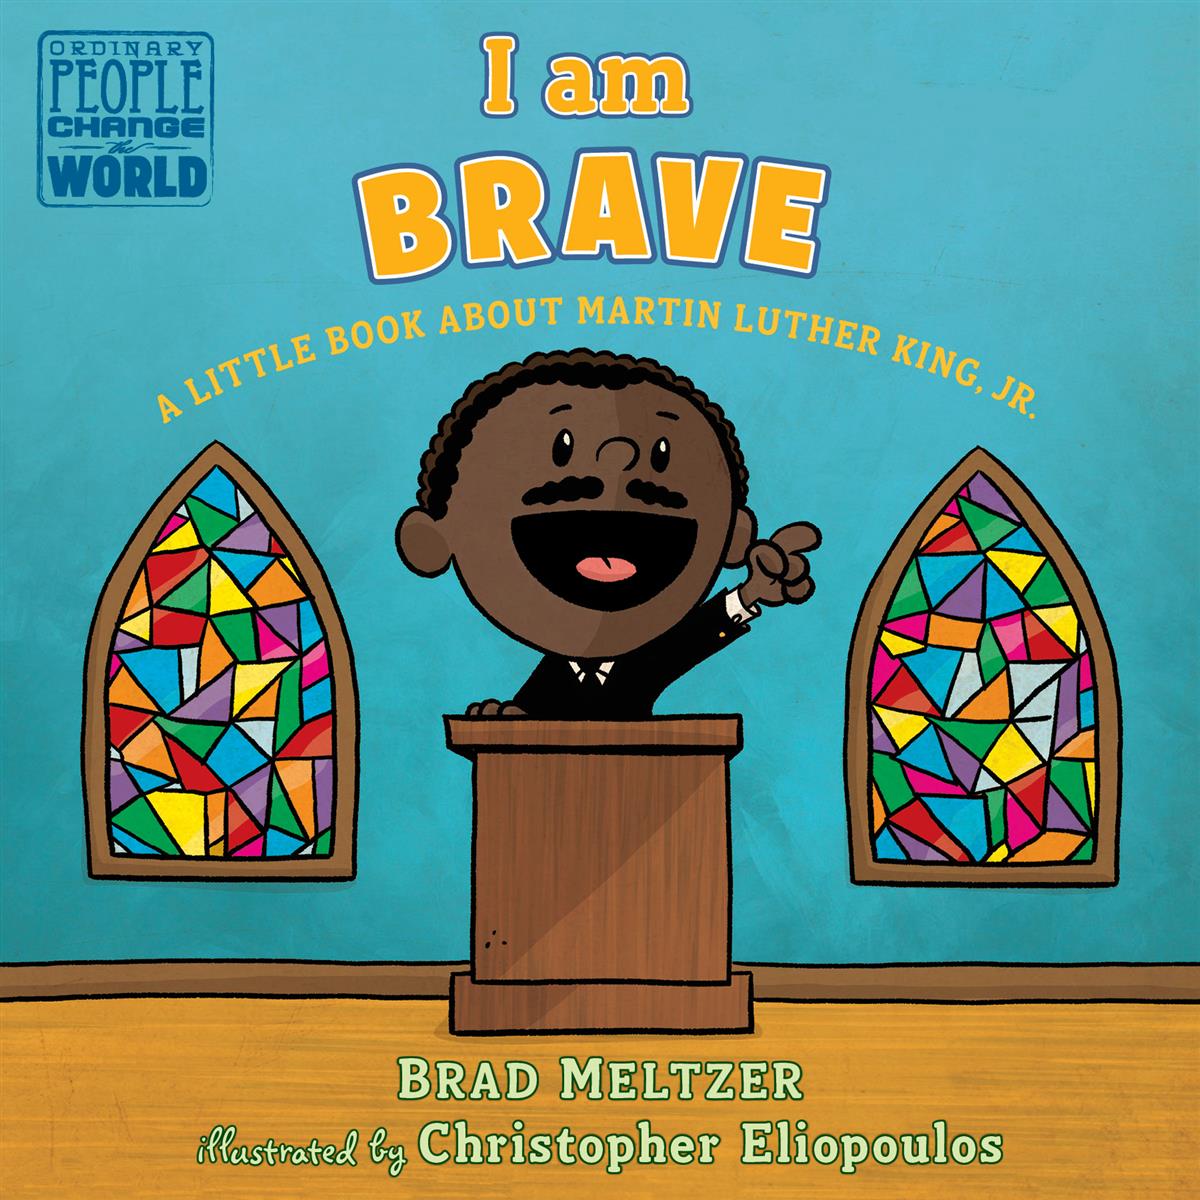 Little　About　I　Diverse　–　A　Am　Jr　King,　Brave:　Luther　Book　Martin　Stories　Kind,　Inclusive,